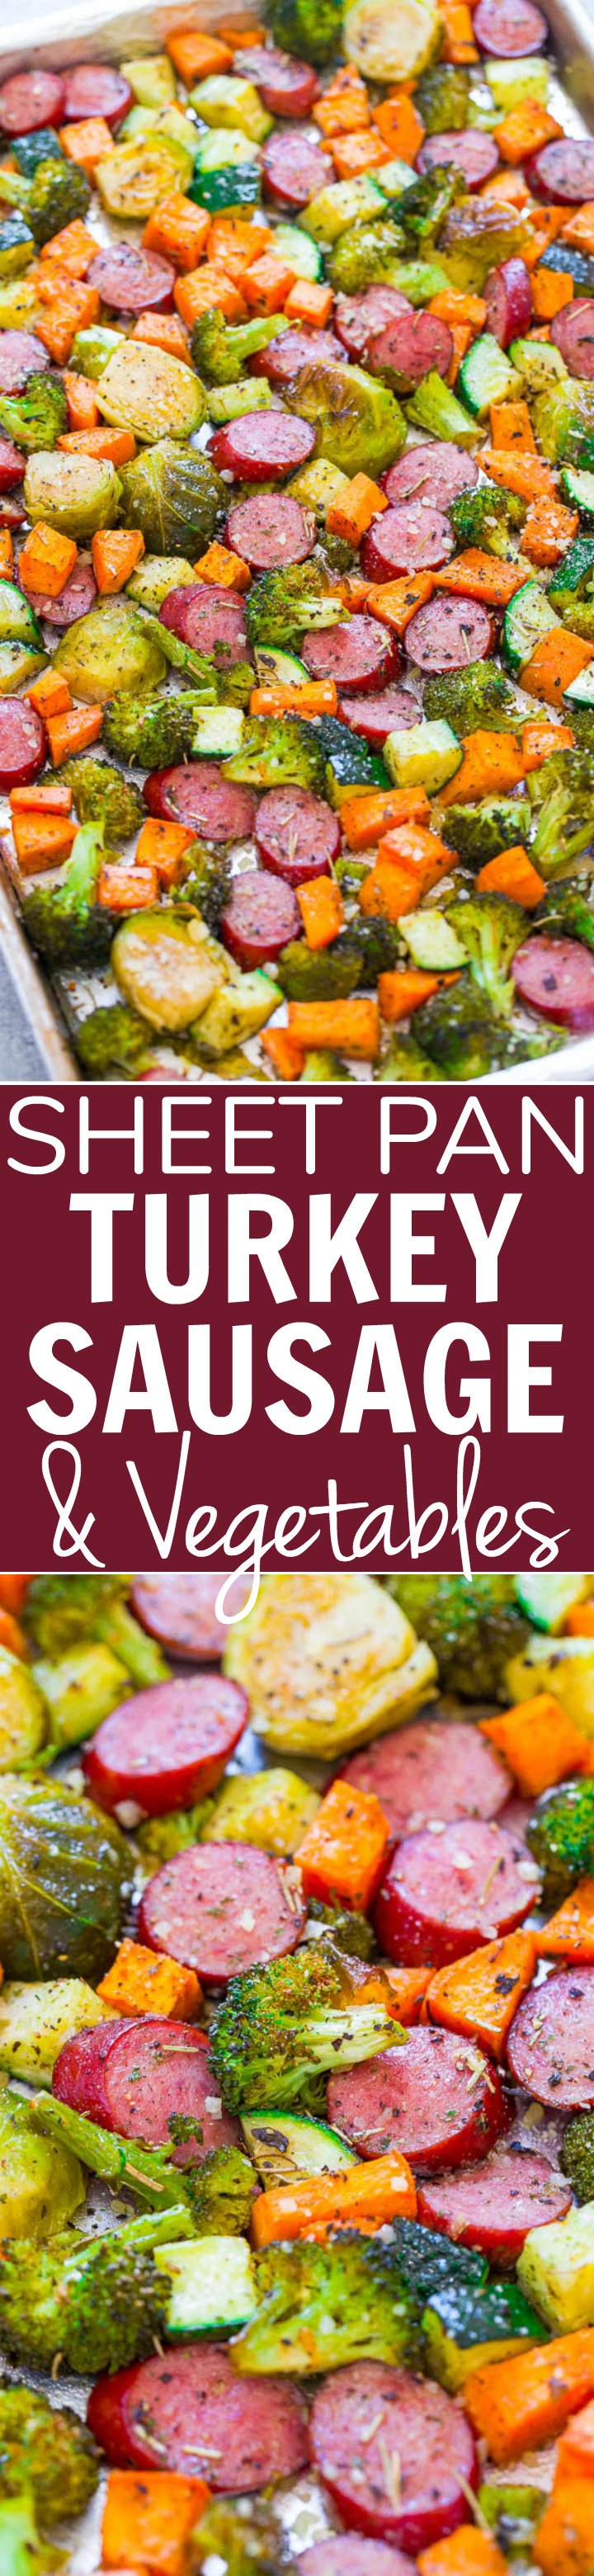 Sheet Pan Turkey Sausage and Vegetables - An EASY, one-pan recipe the whole family will love!! Seasoned crisp-tender veggies, juicy sausage, and Parmesan cheese for the DELISH dinnertime WIN!! 